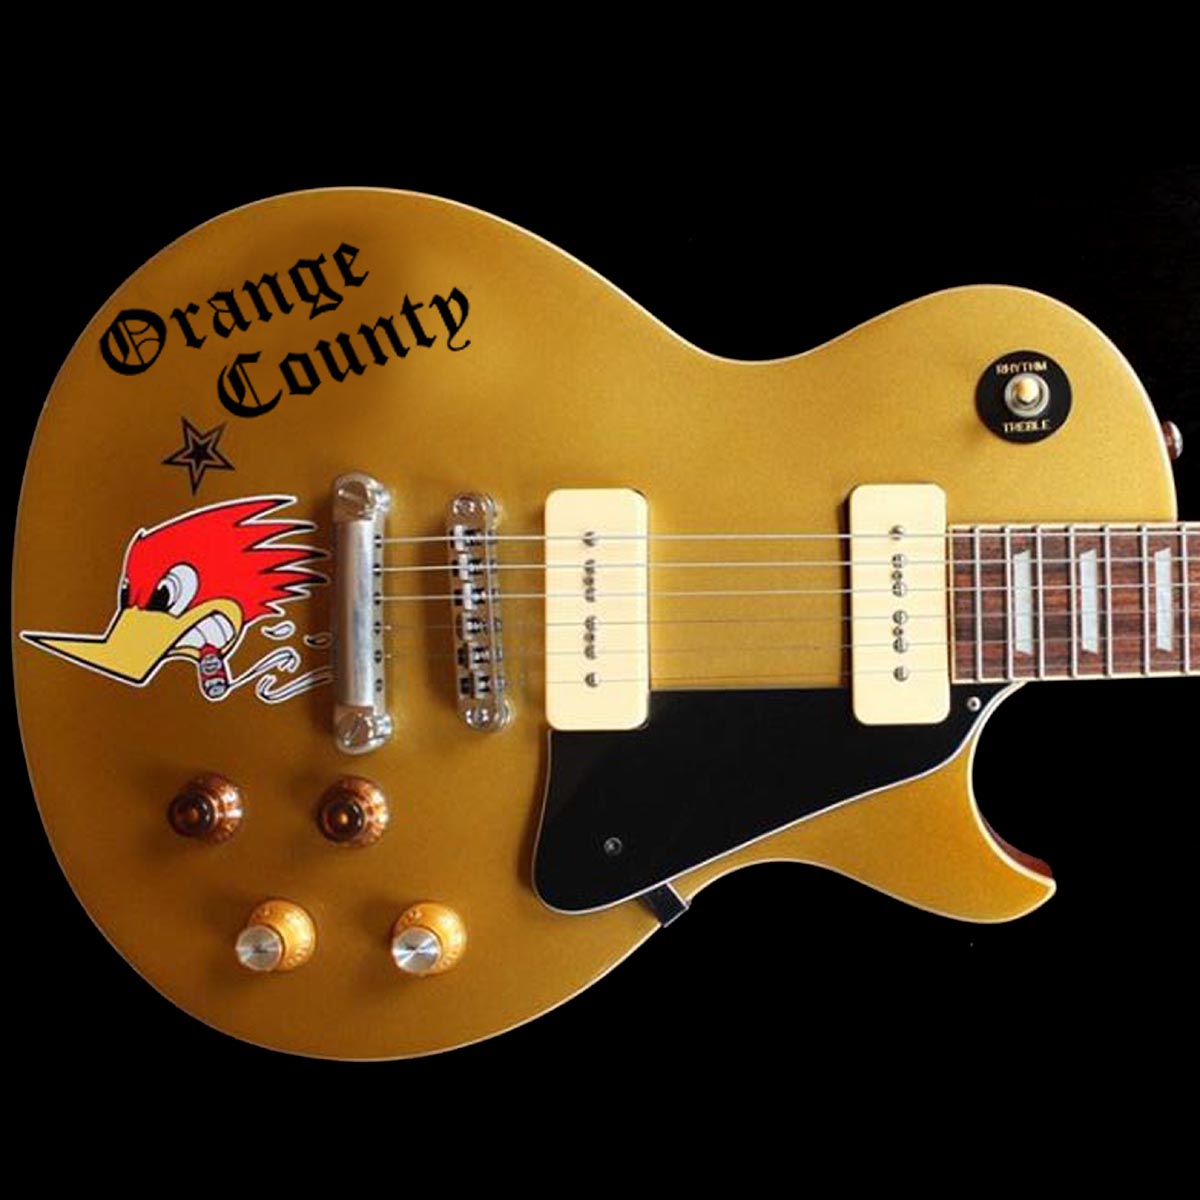 Mike Ness Les Paul Replica Decals